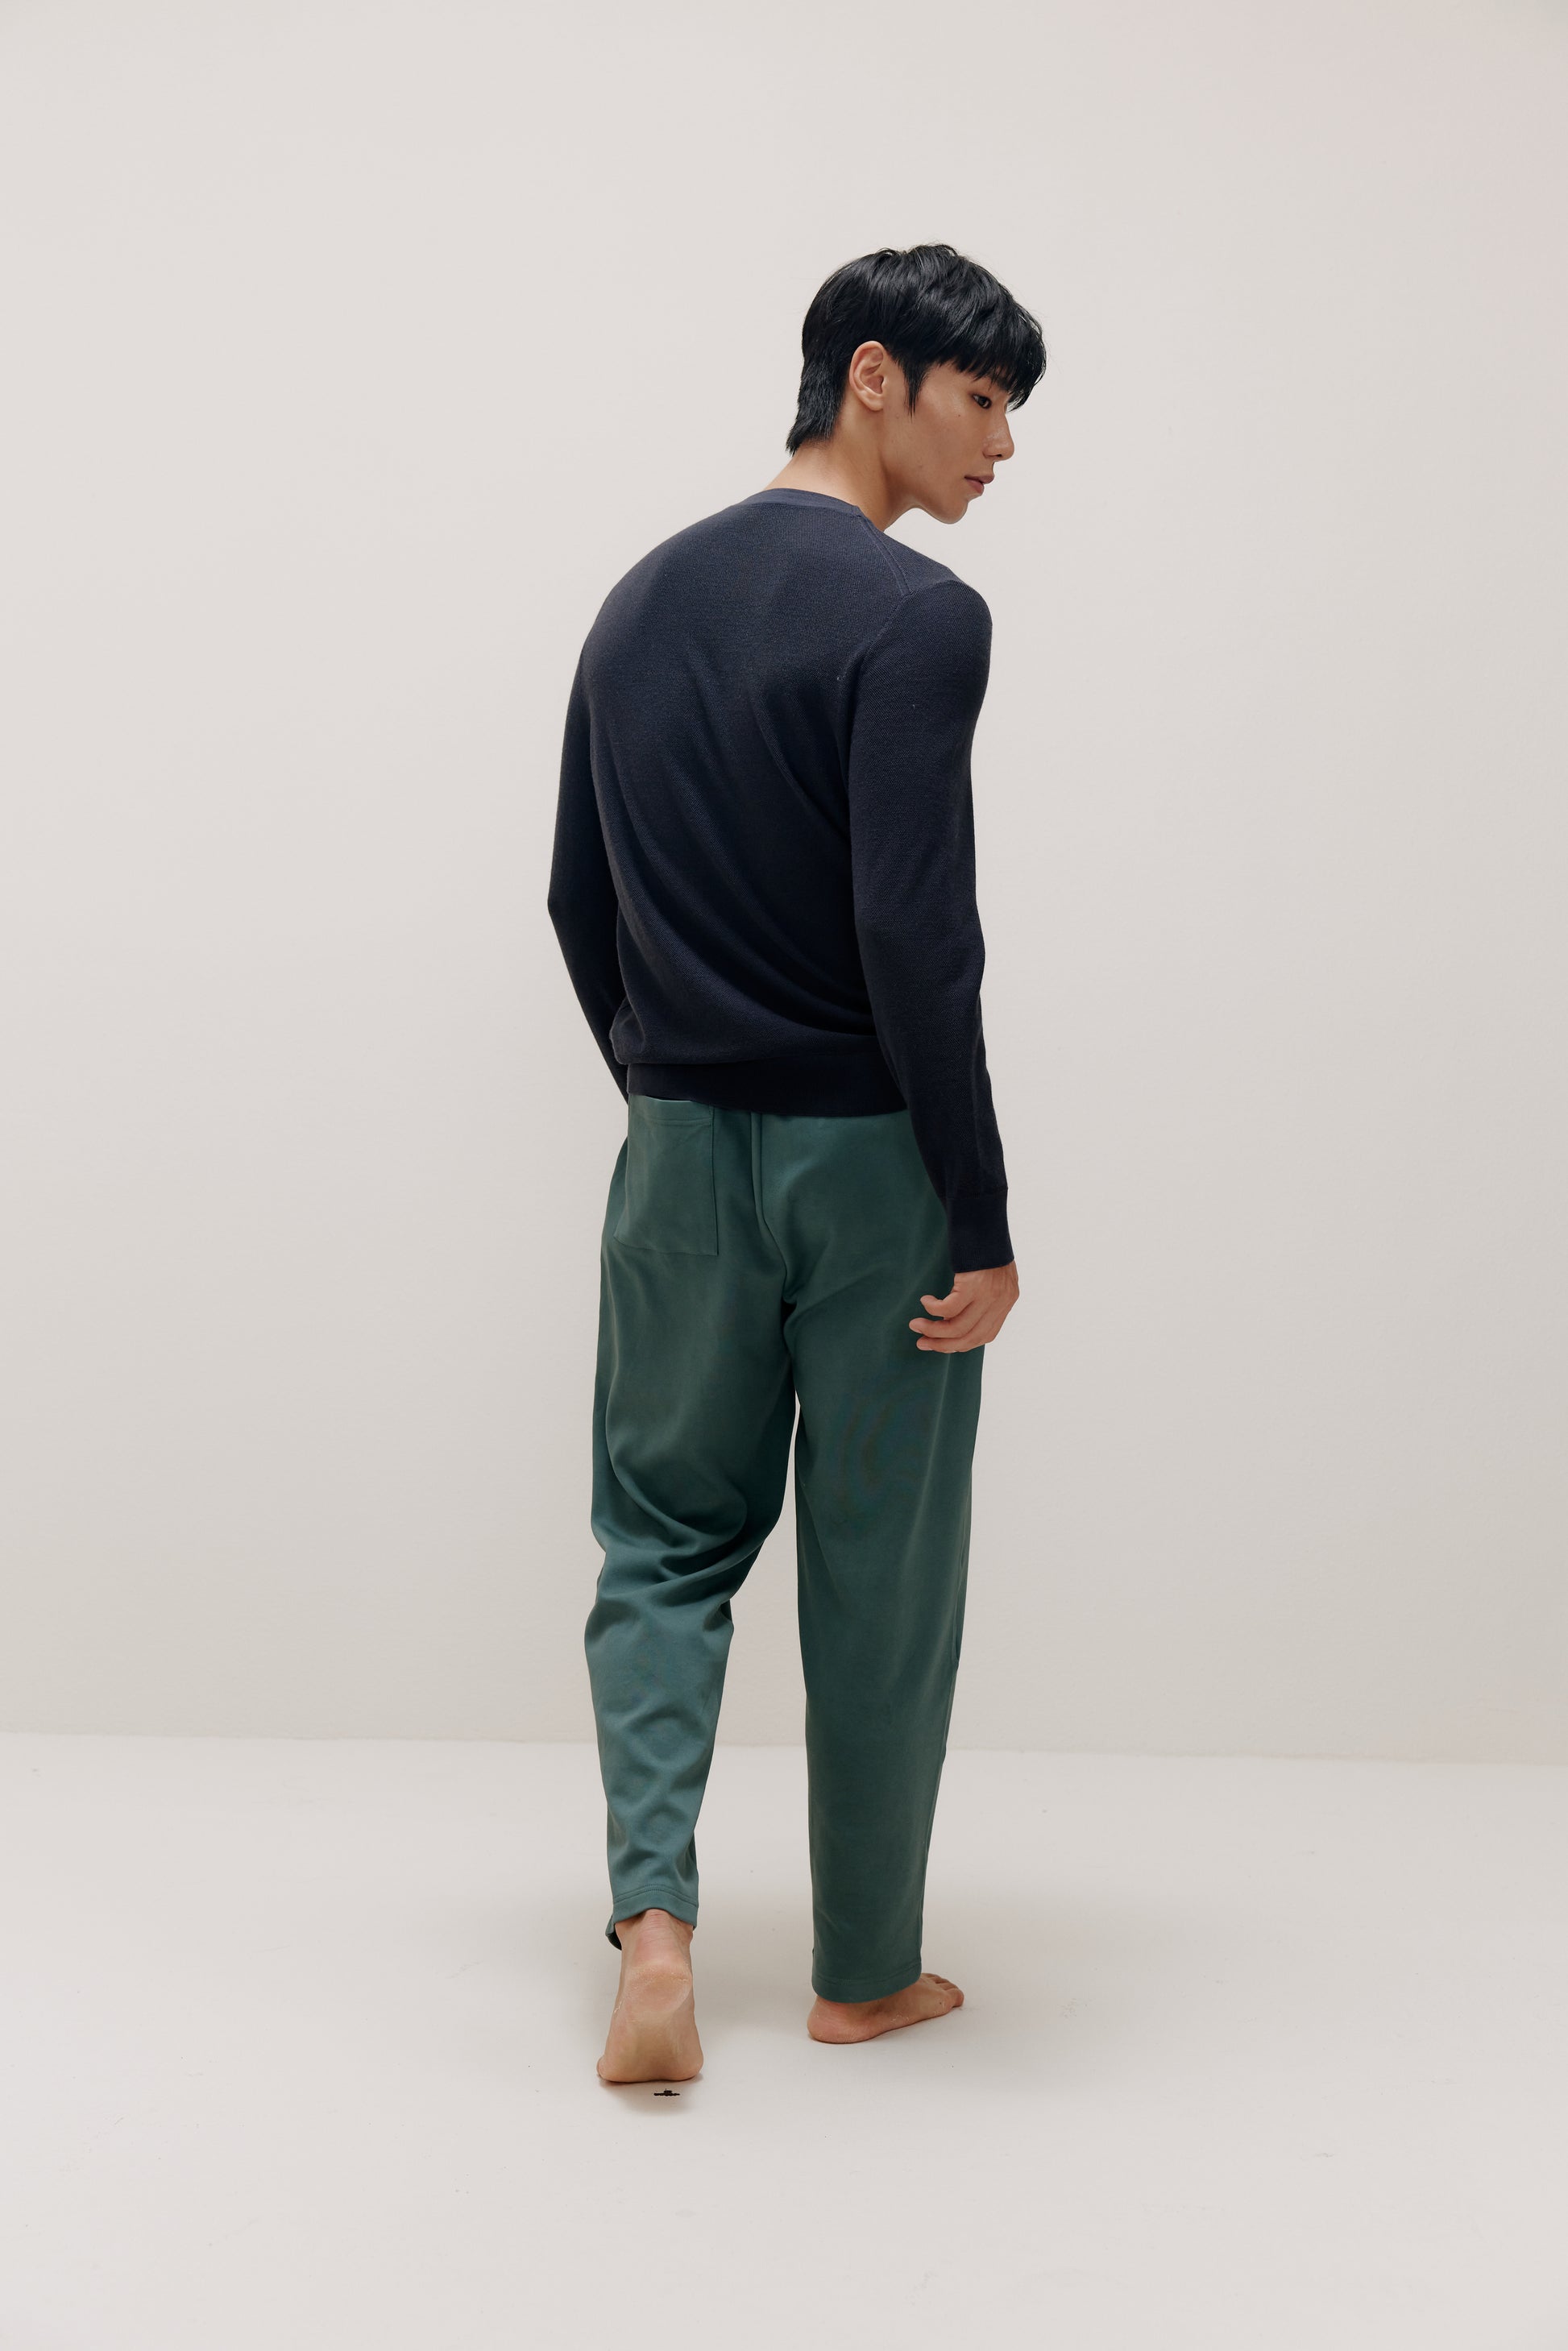 back of man in navy sweater and green pants